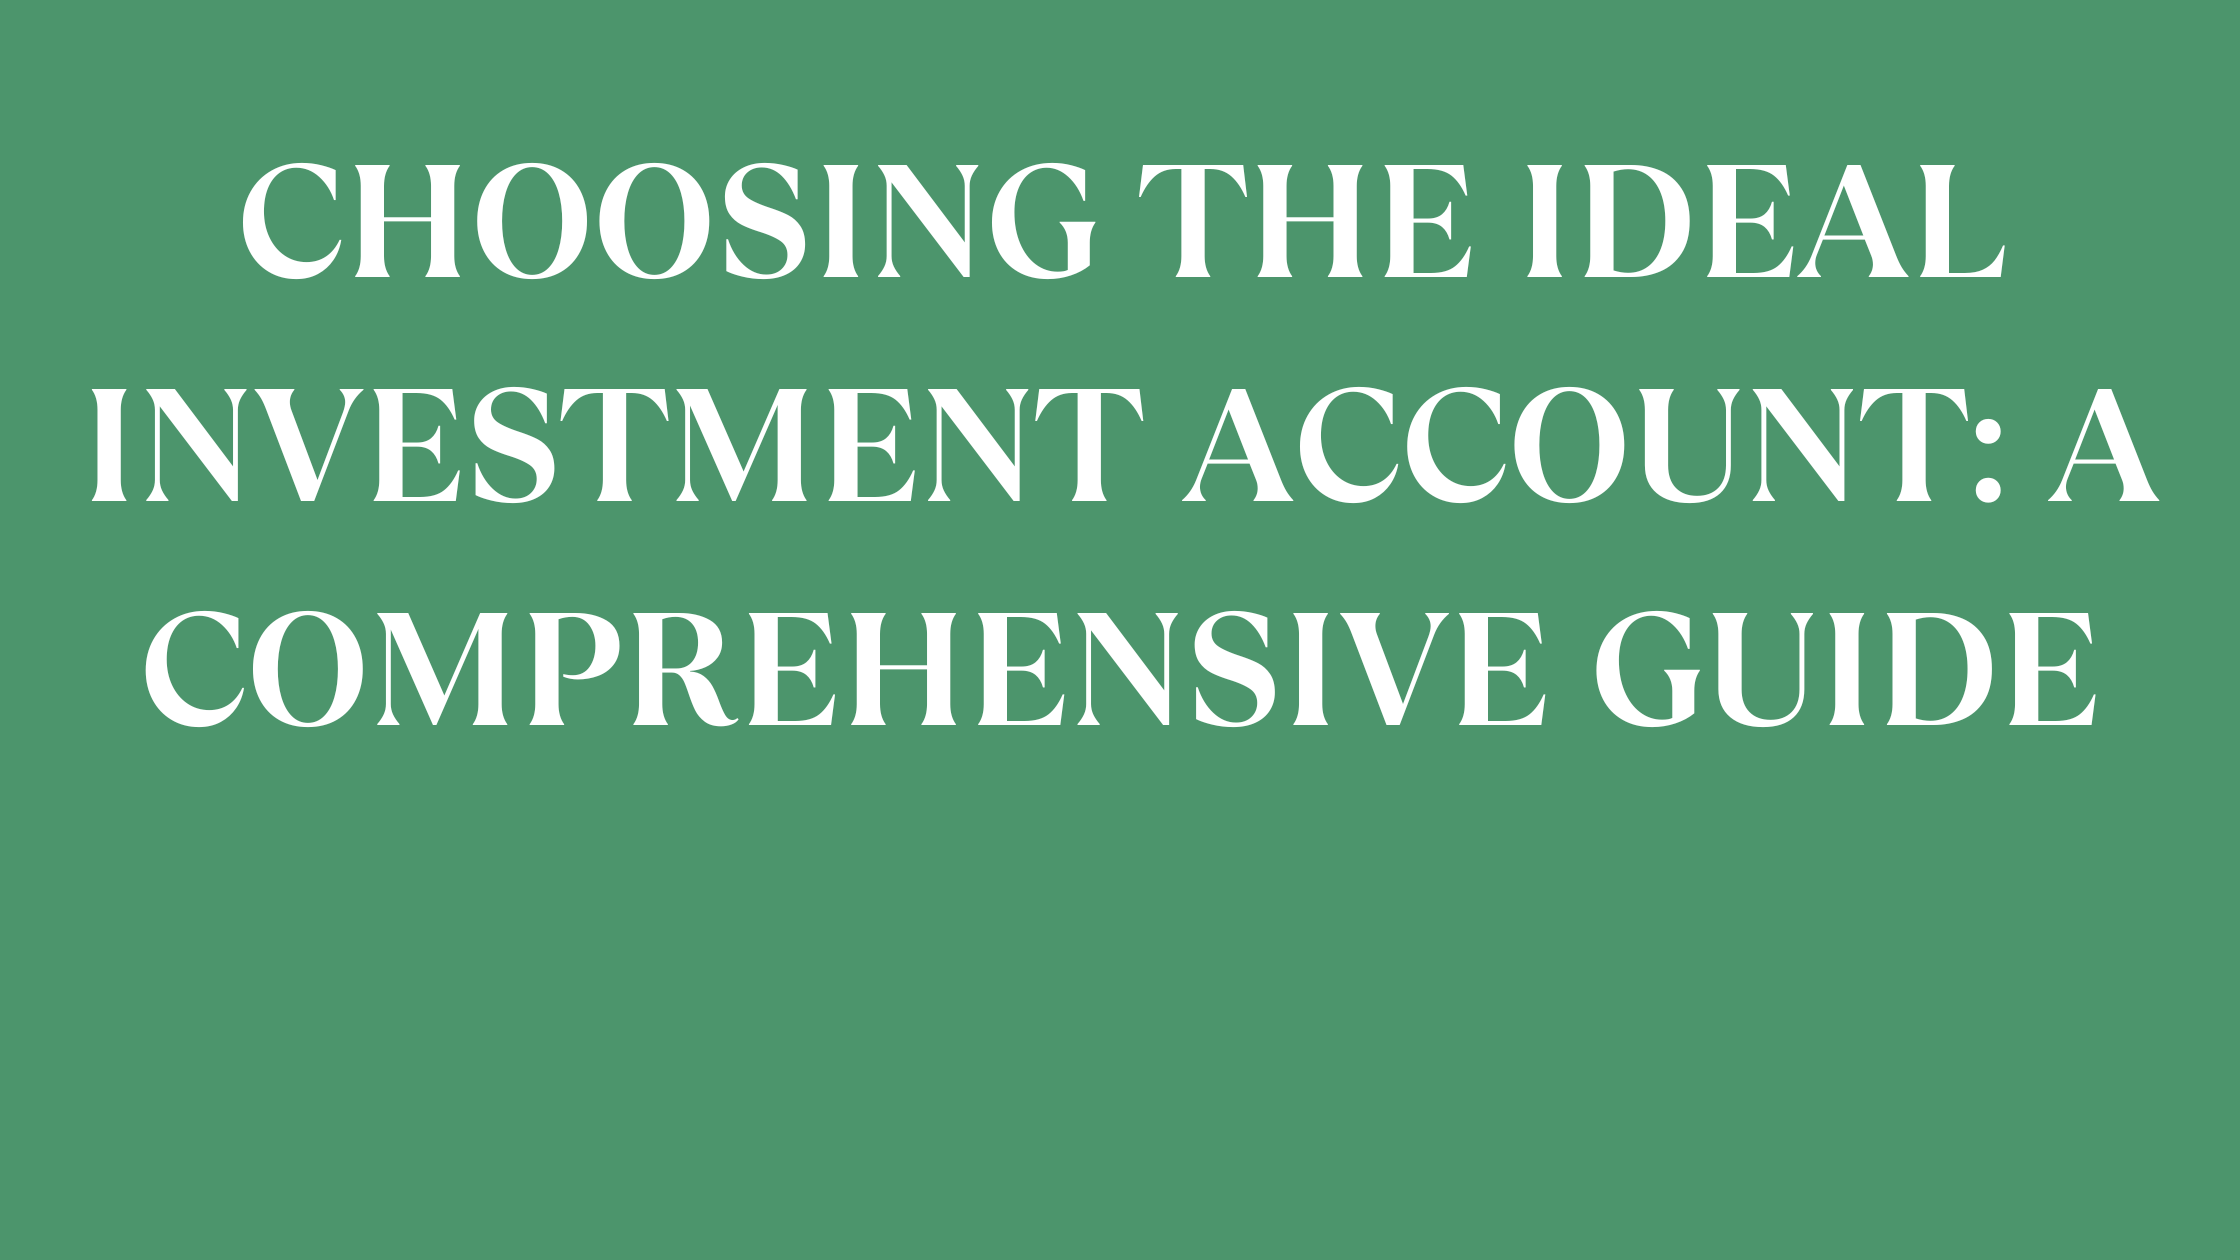 Choosing the Ideal Investment Account: A Comprehensive Guide